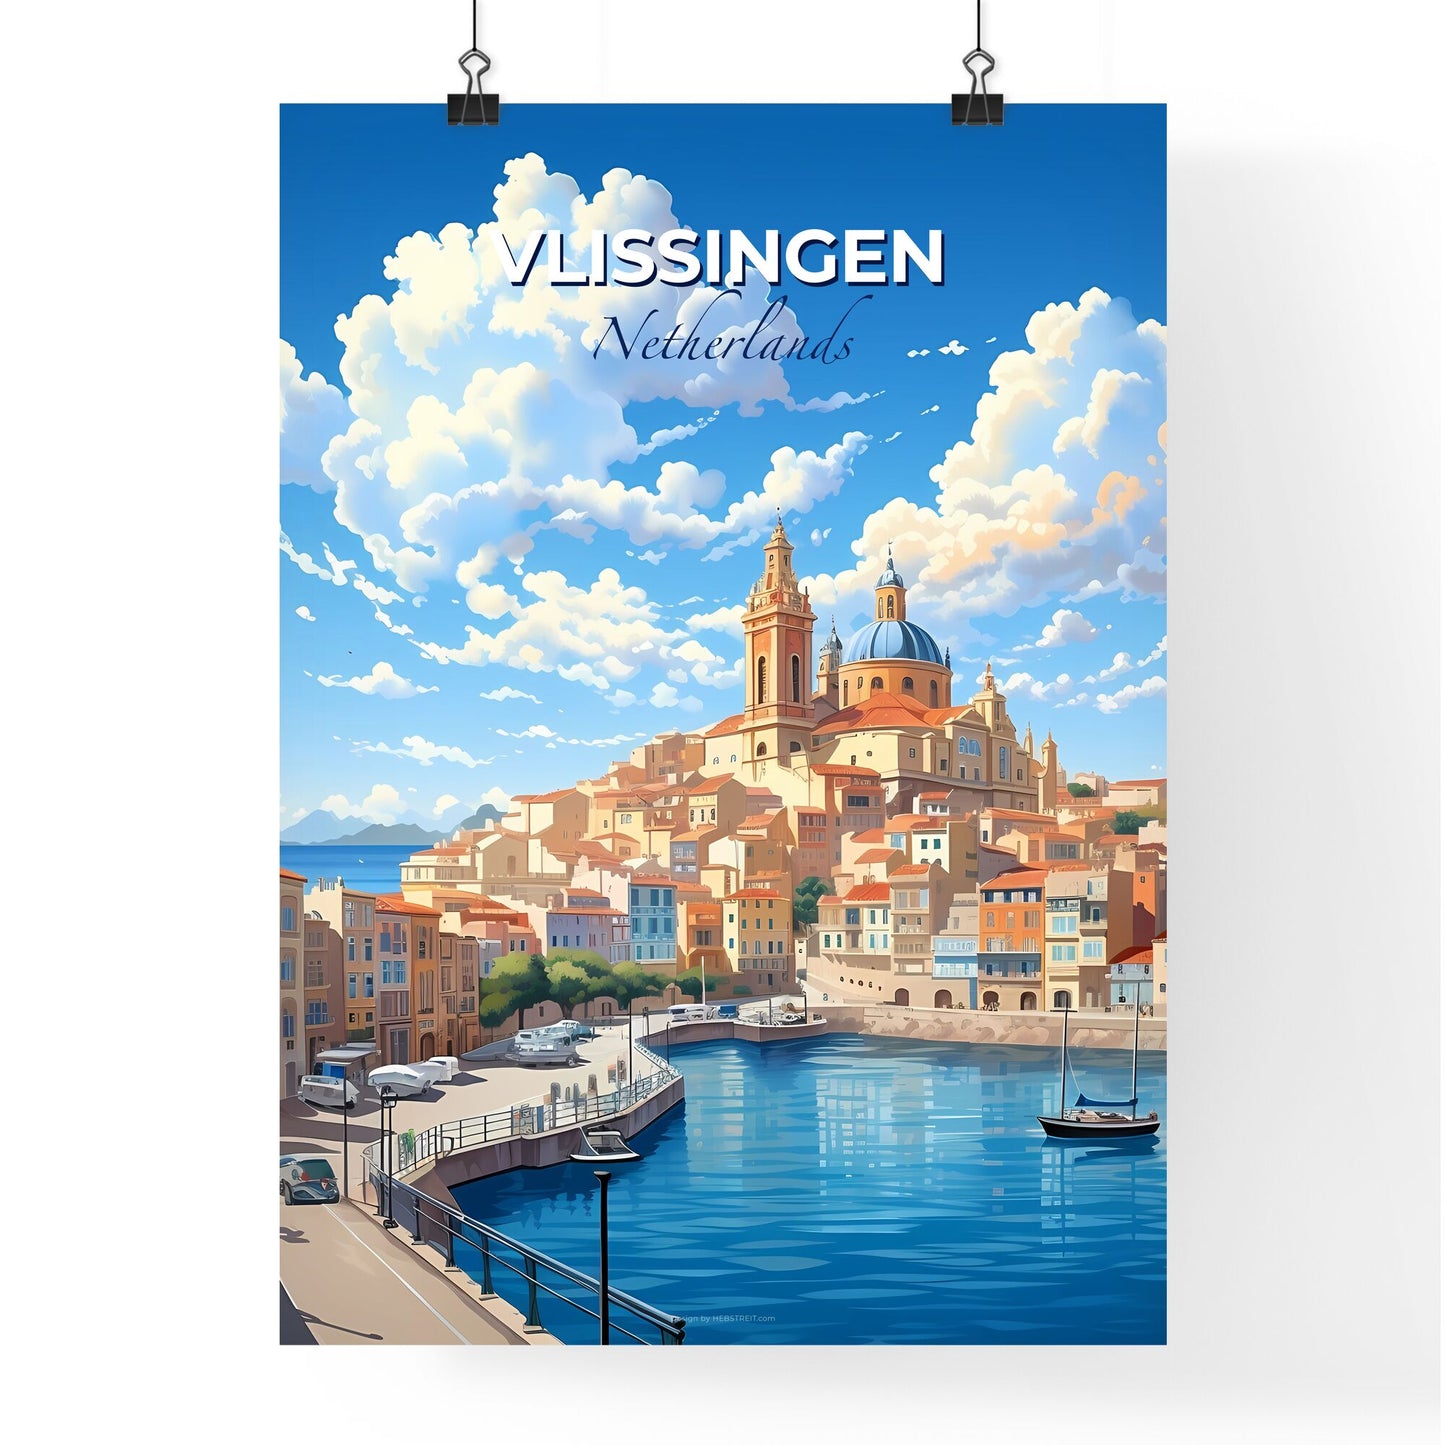 Vlissingen, Netherlands, A Poster of a city by the water Default Title